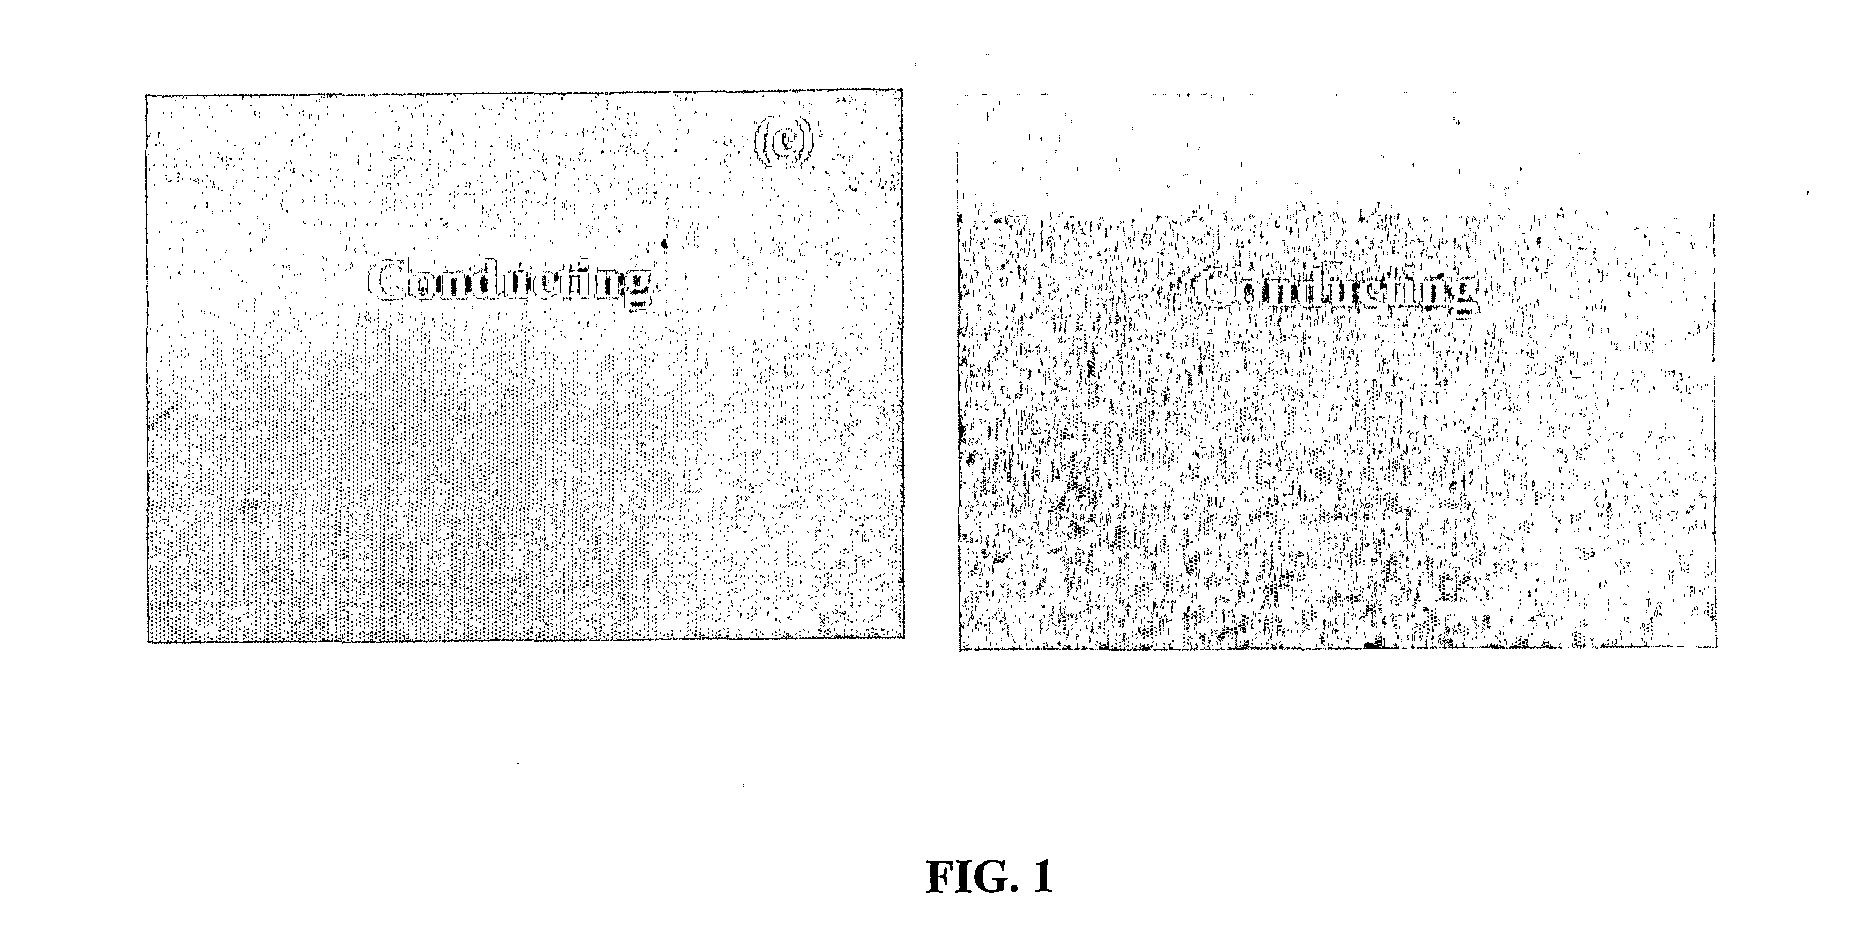 Optical memory device based on dhlfc material and method of preparing the same